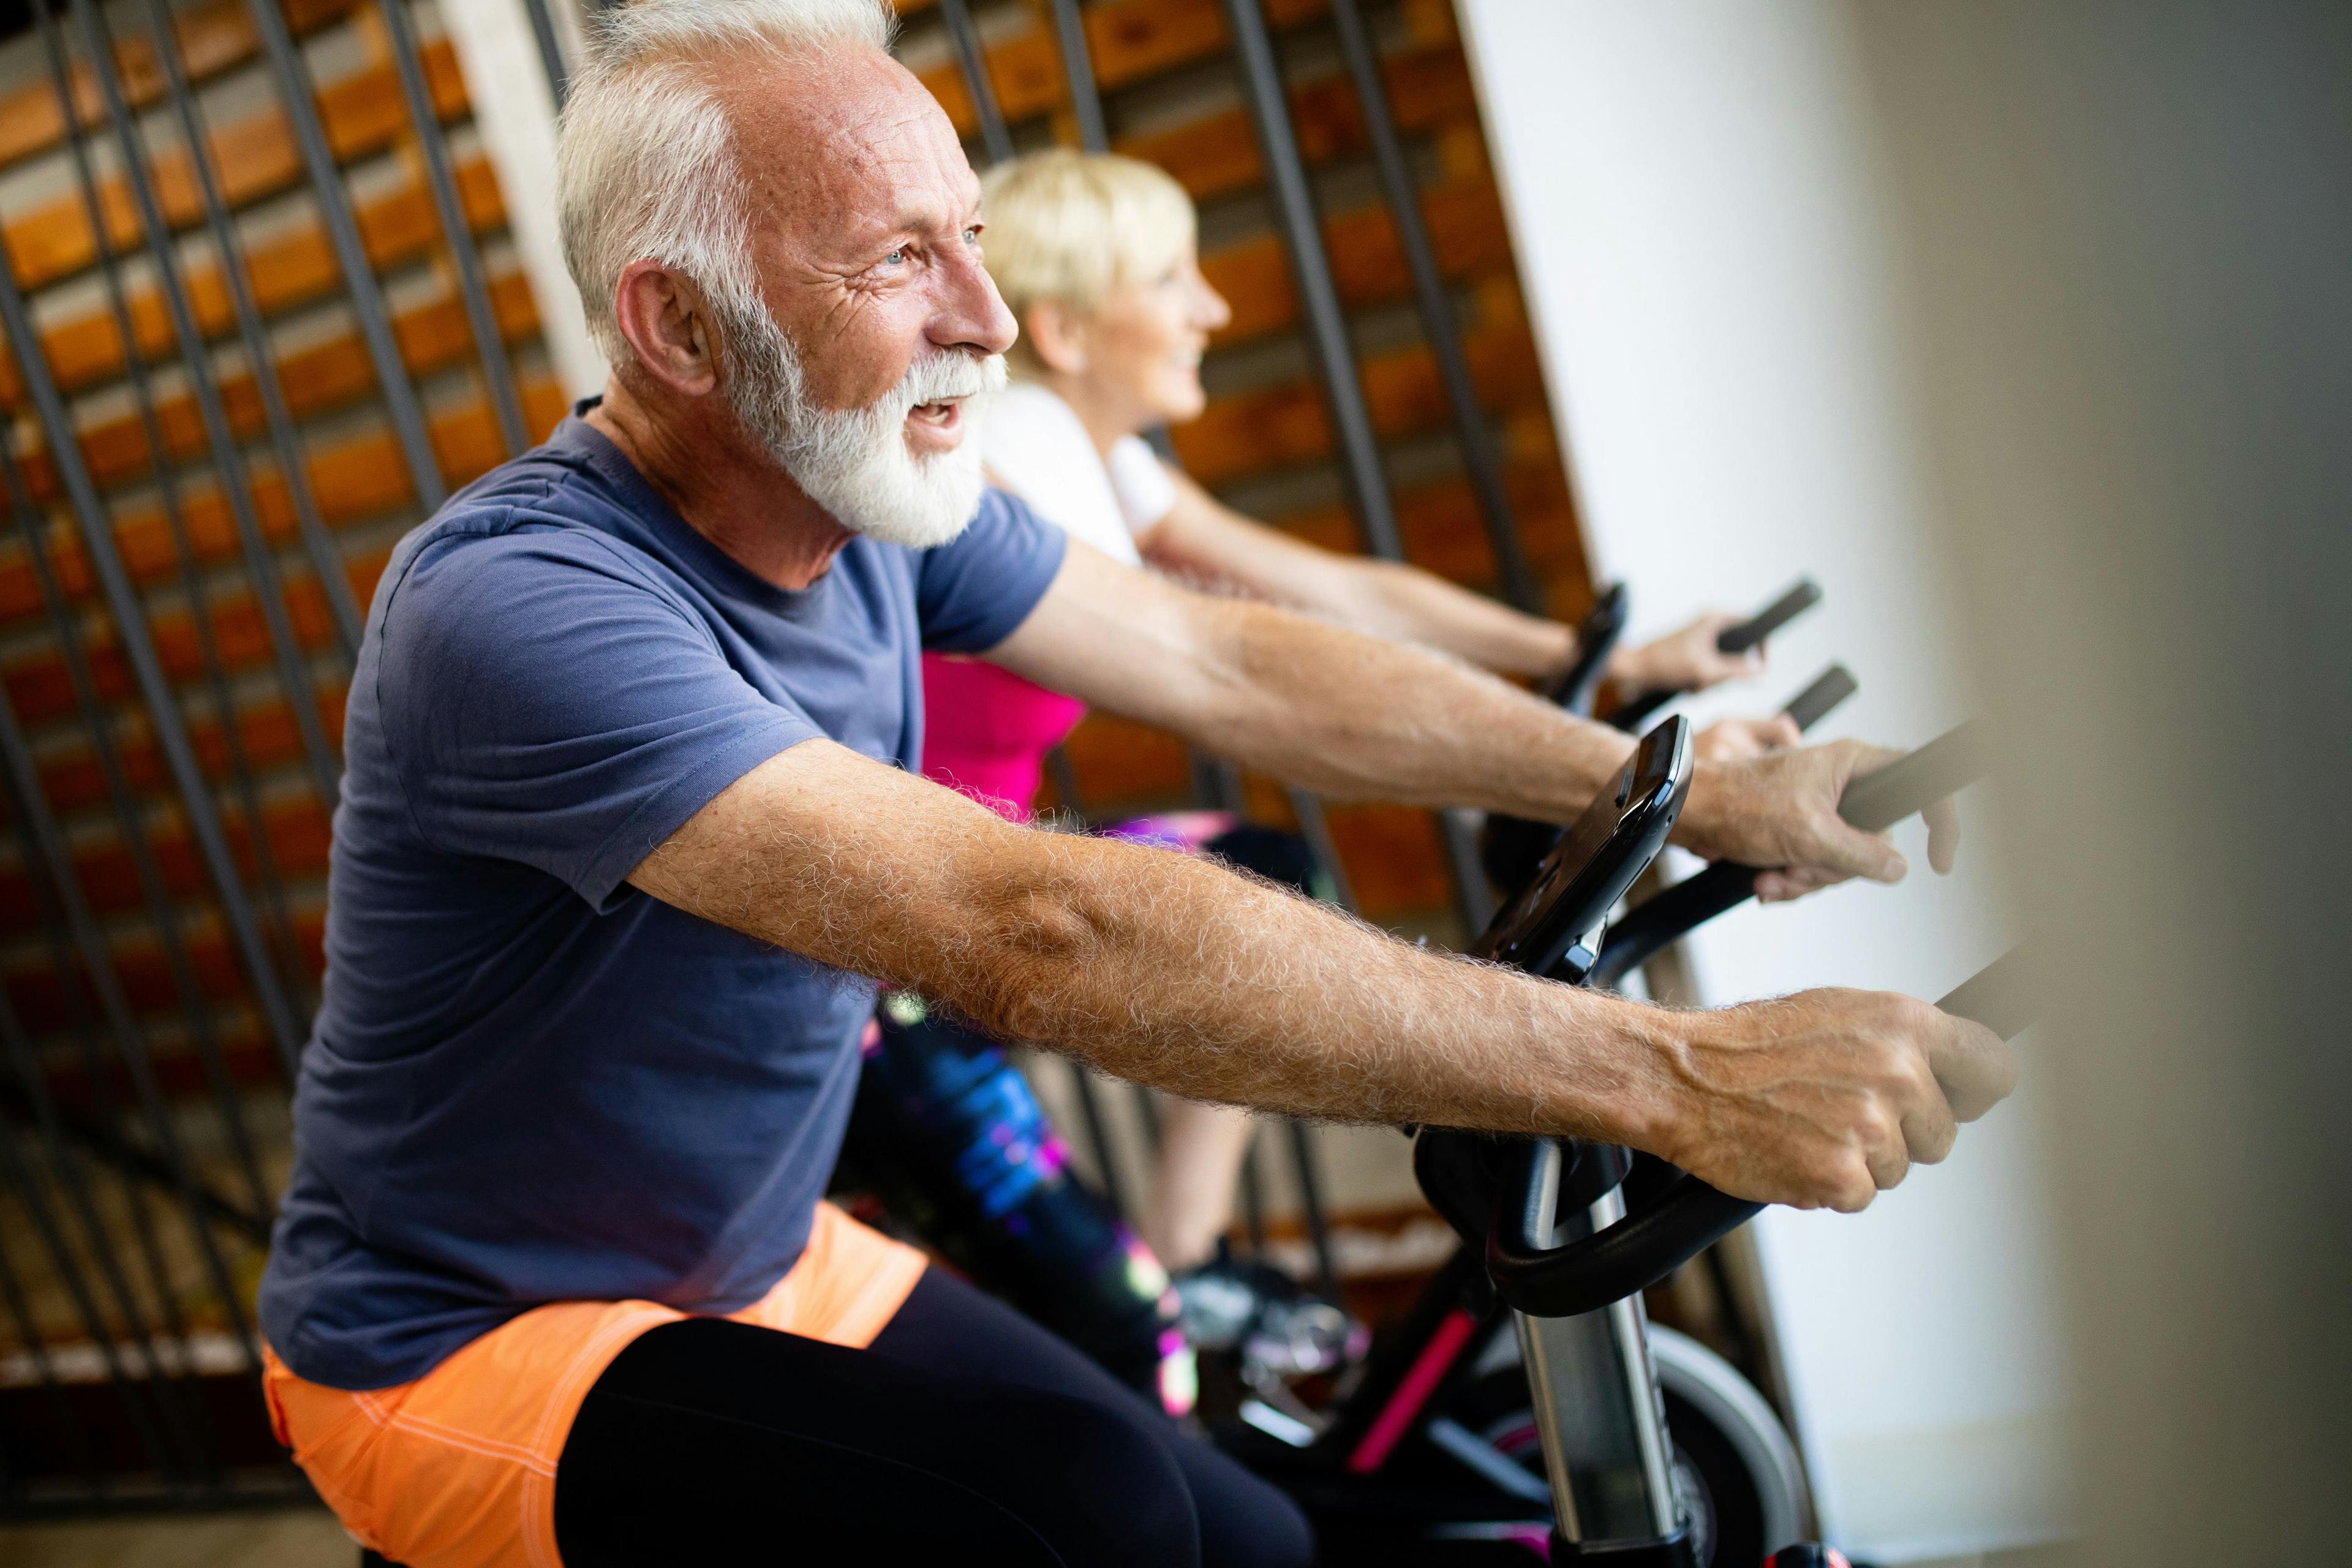 Light Exercise May Cut Exacerbations, Hospital Readmissions in AECOPD